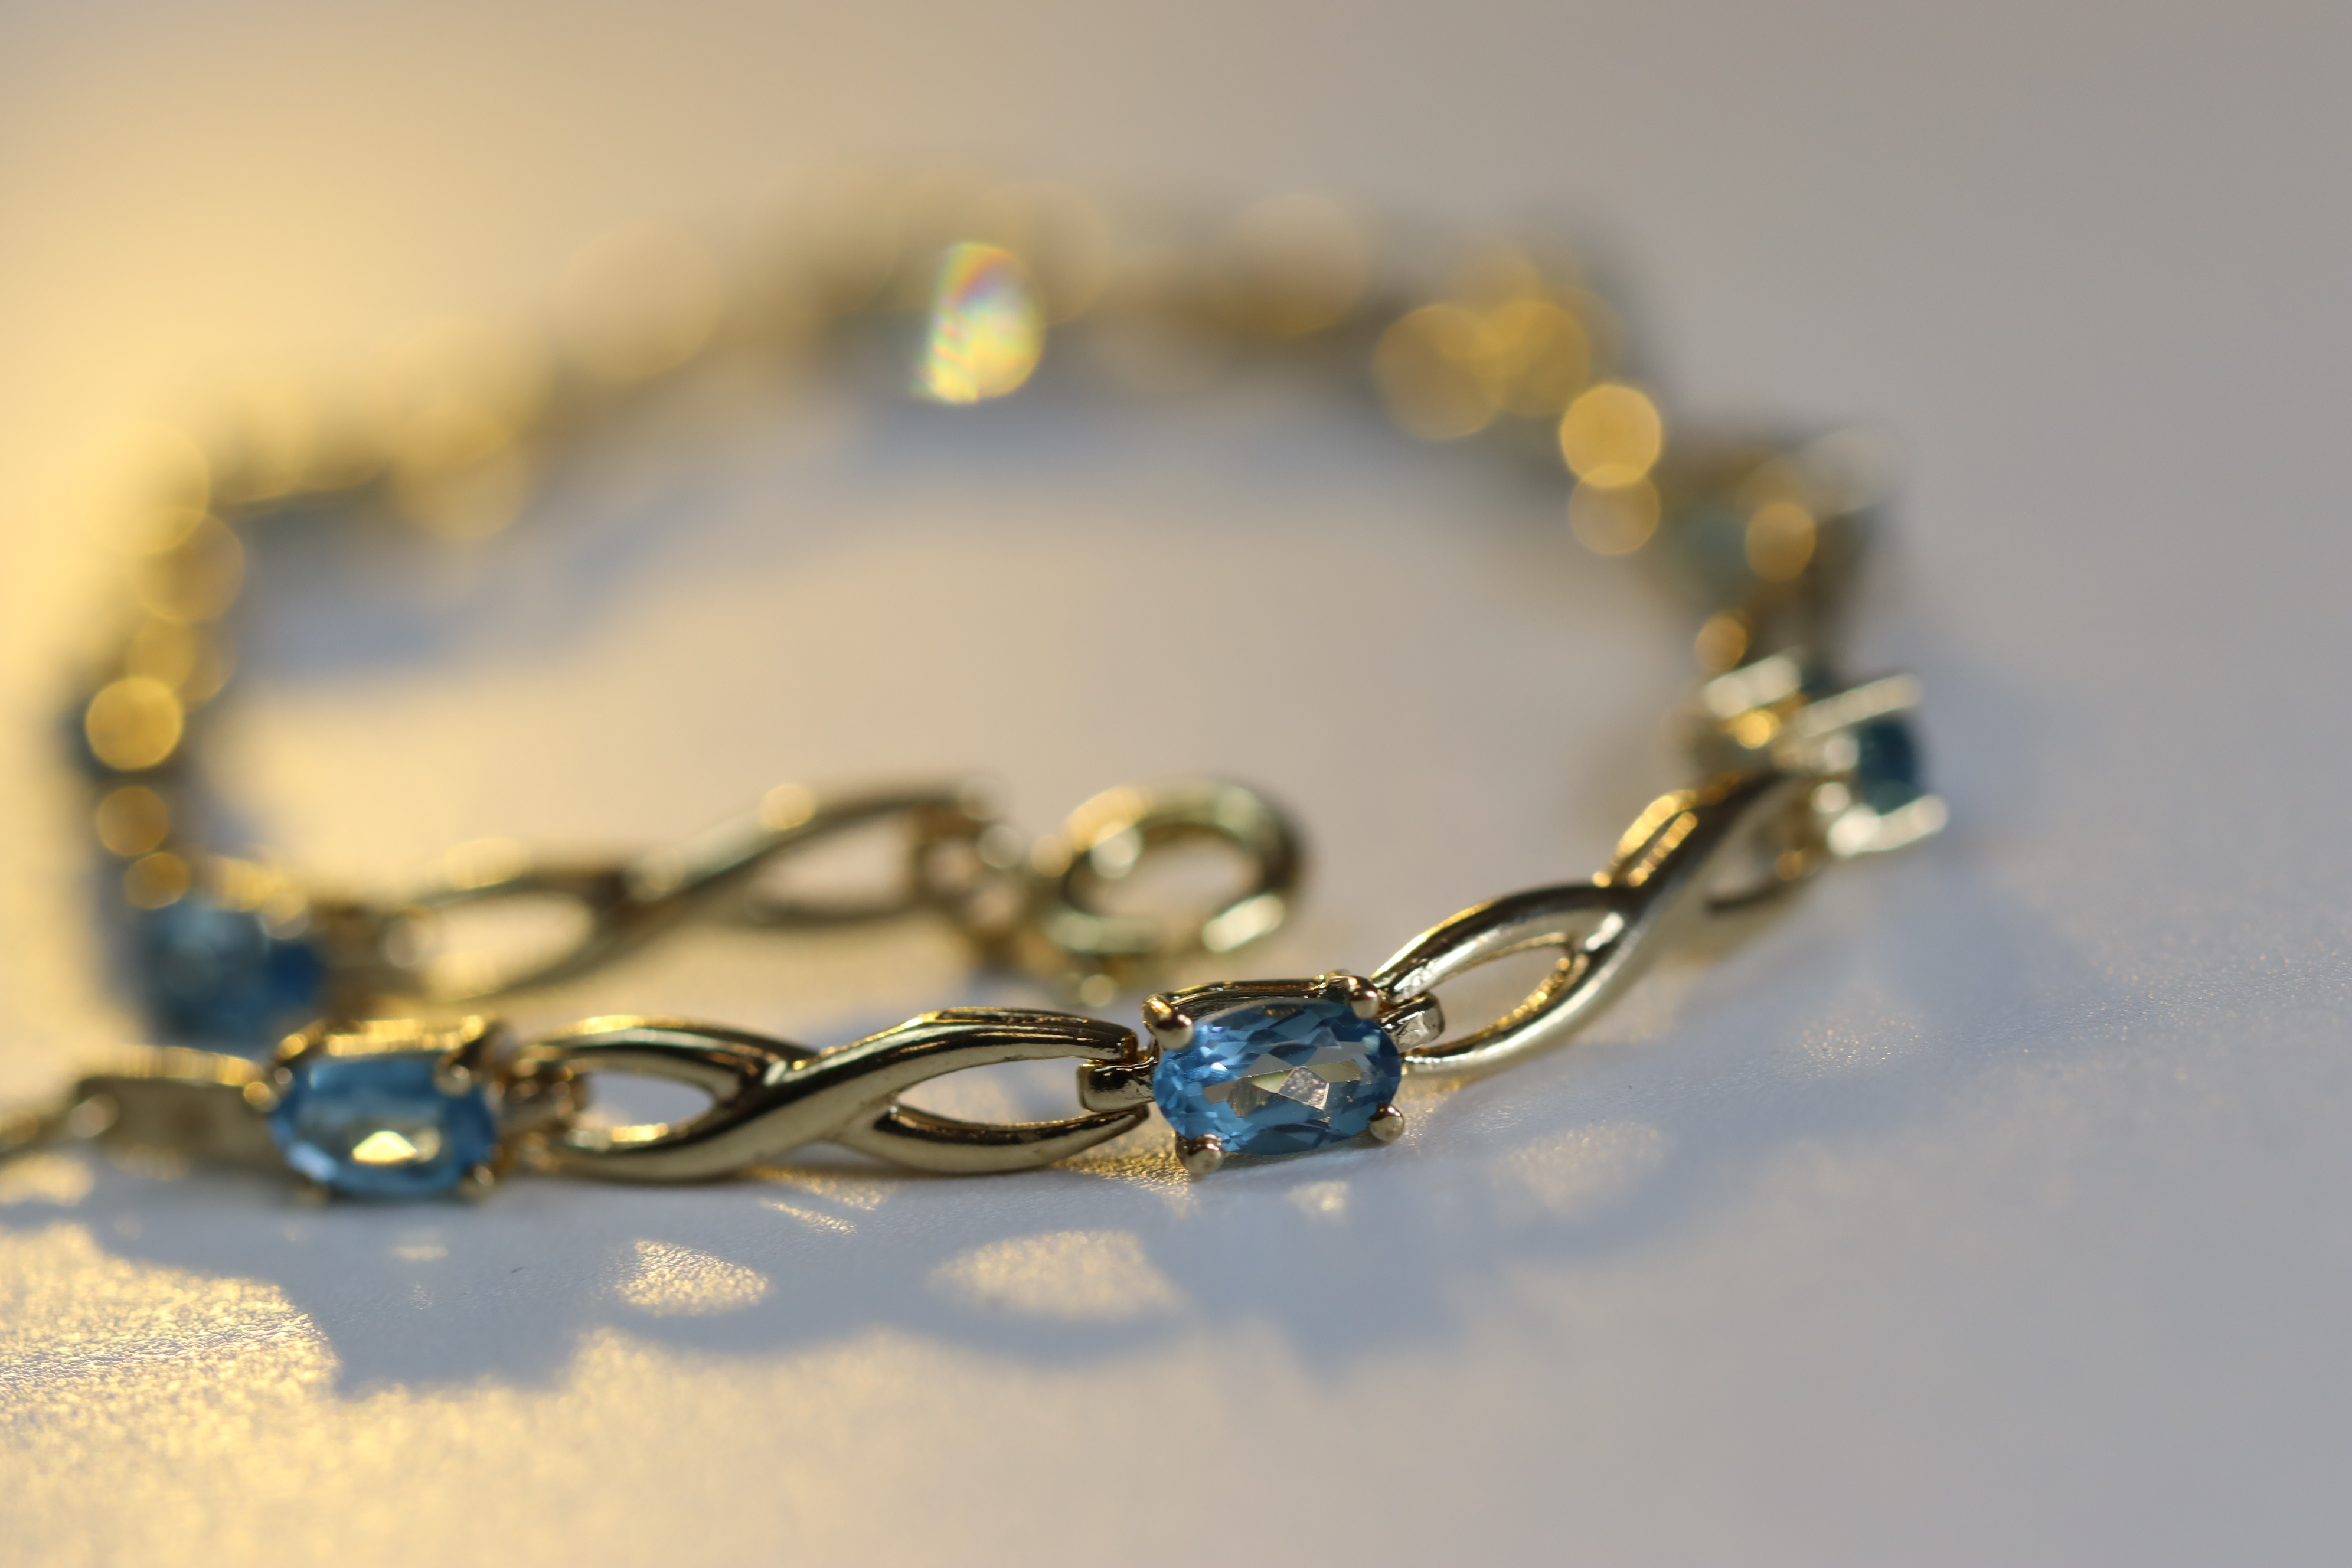 A Blue Topaz and Yellow Metal Line Bracelet A Blue Topaz and Yellow Metal Line Bracelet, set with - Image 5 of 8